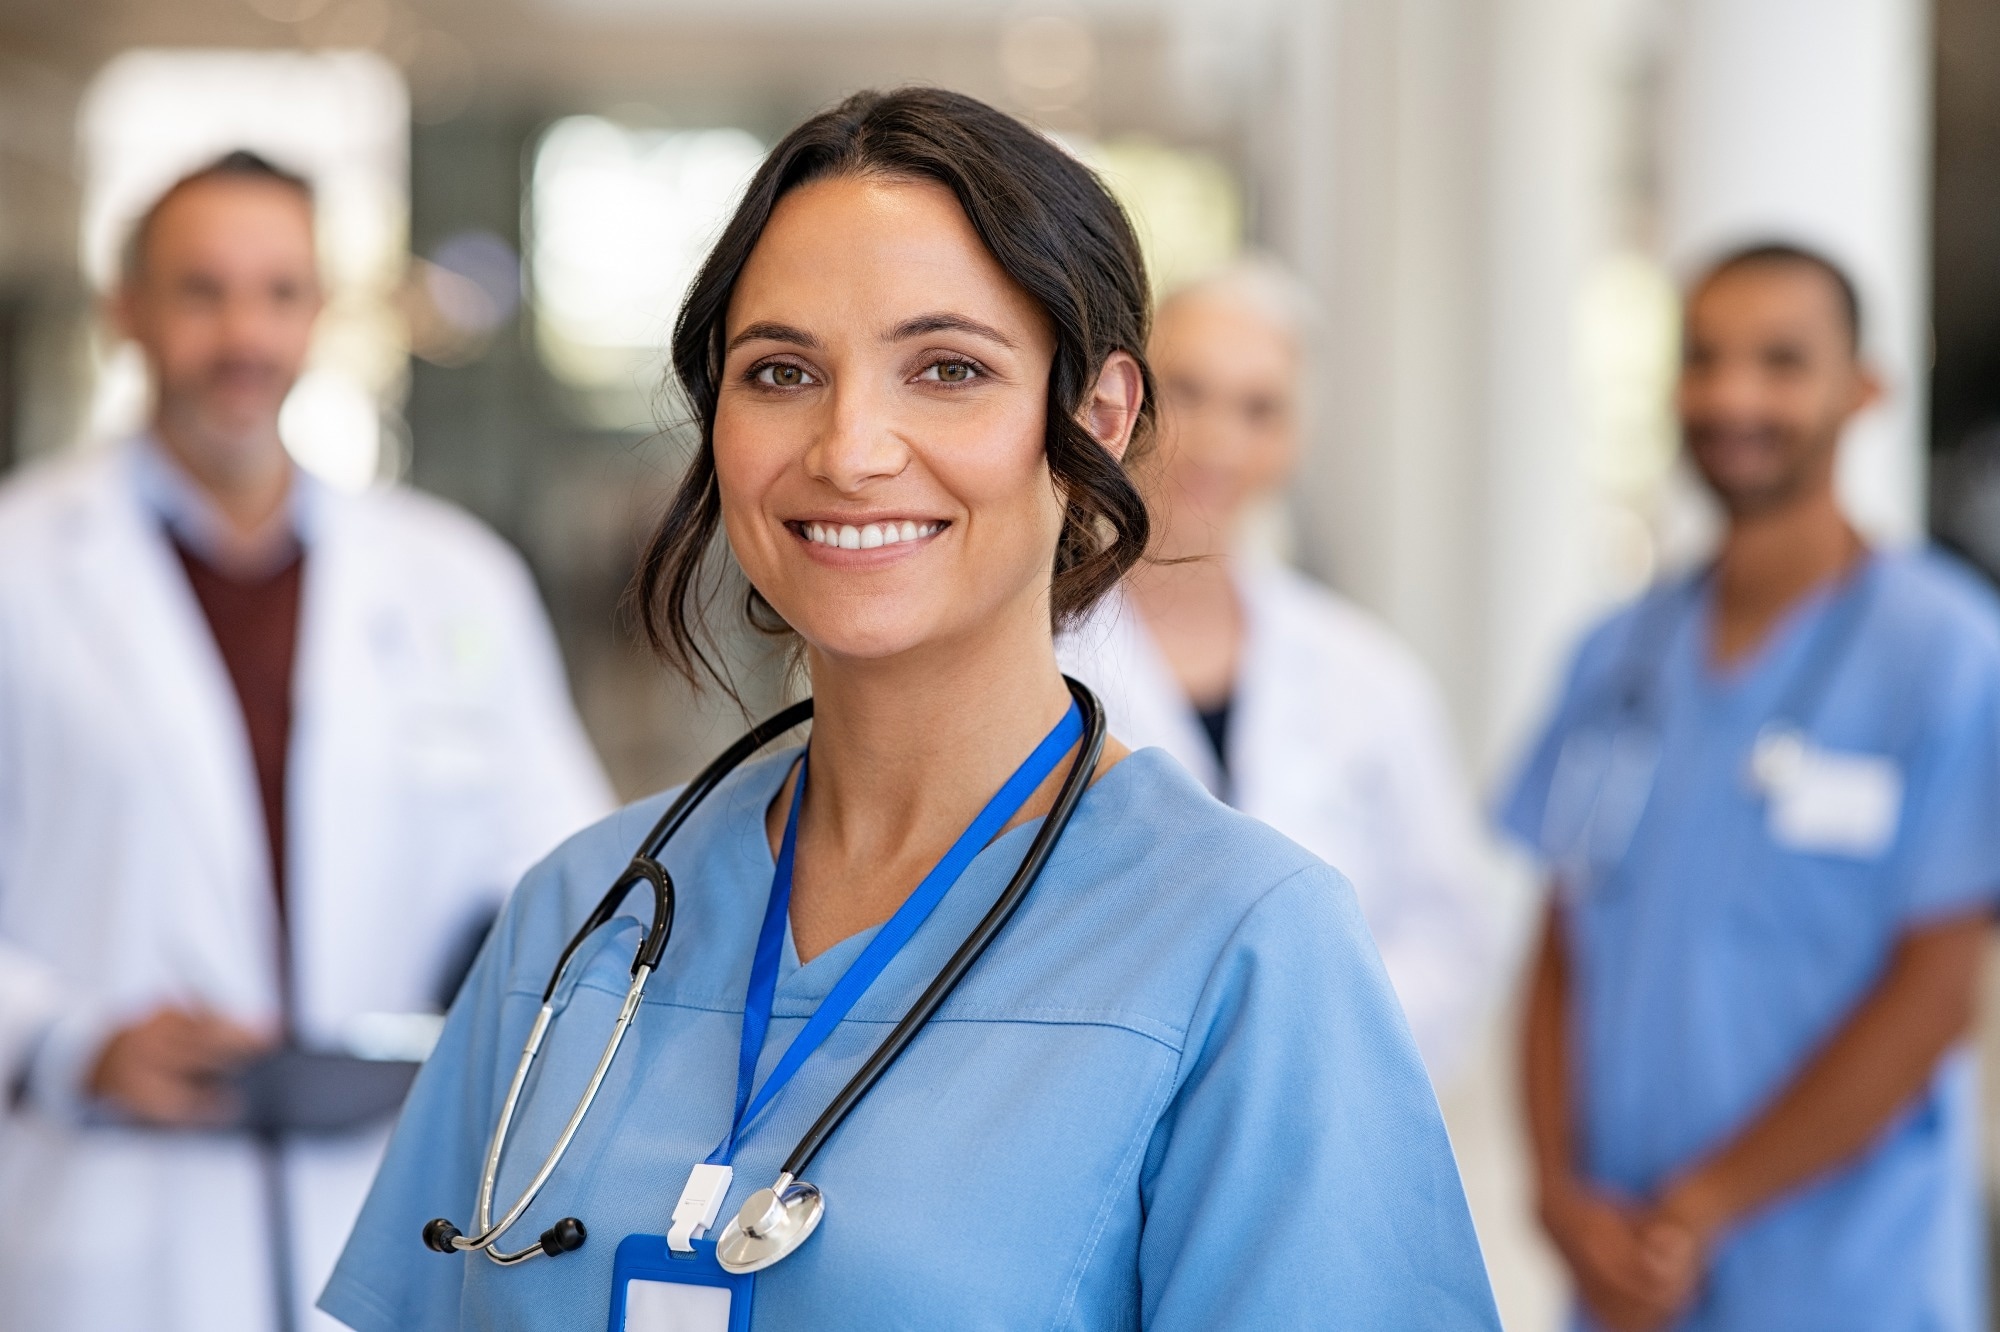 Study: The Well-Being of Women in Healthcare Professions: A Comprehensive Review. Image Credit: Ground Picture / Shutterstock.com